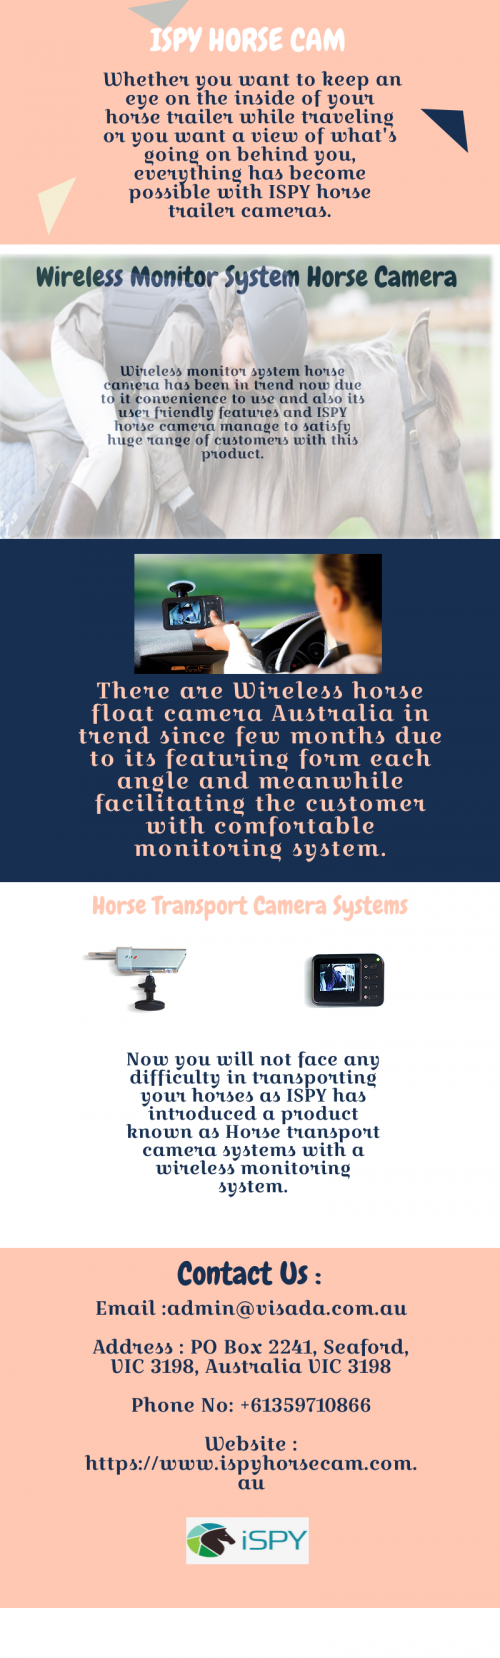 Wireless Ispy Horse Camera is very useful tool for a traveller to go with the horse. Its high technology camera can be used for home security.https://www.ispyhorsecam.com.au/